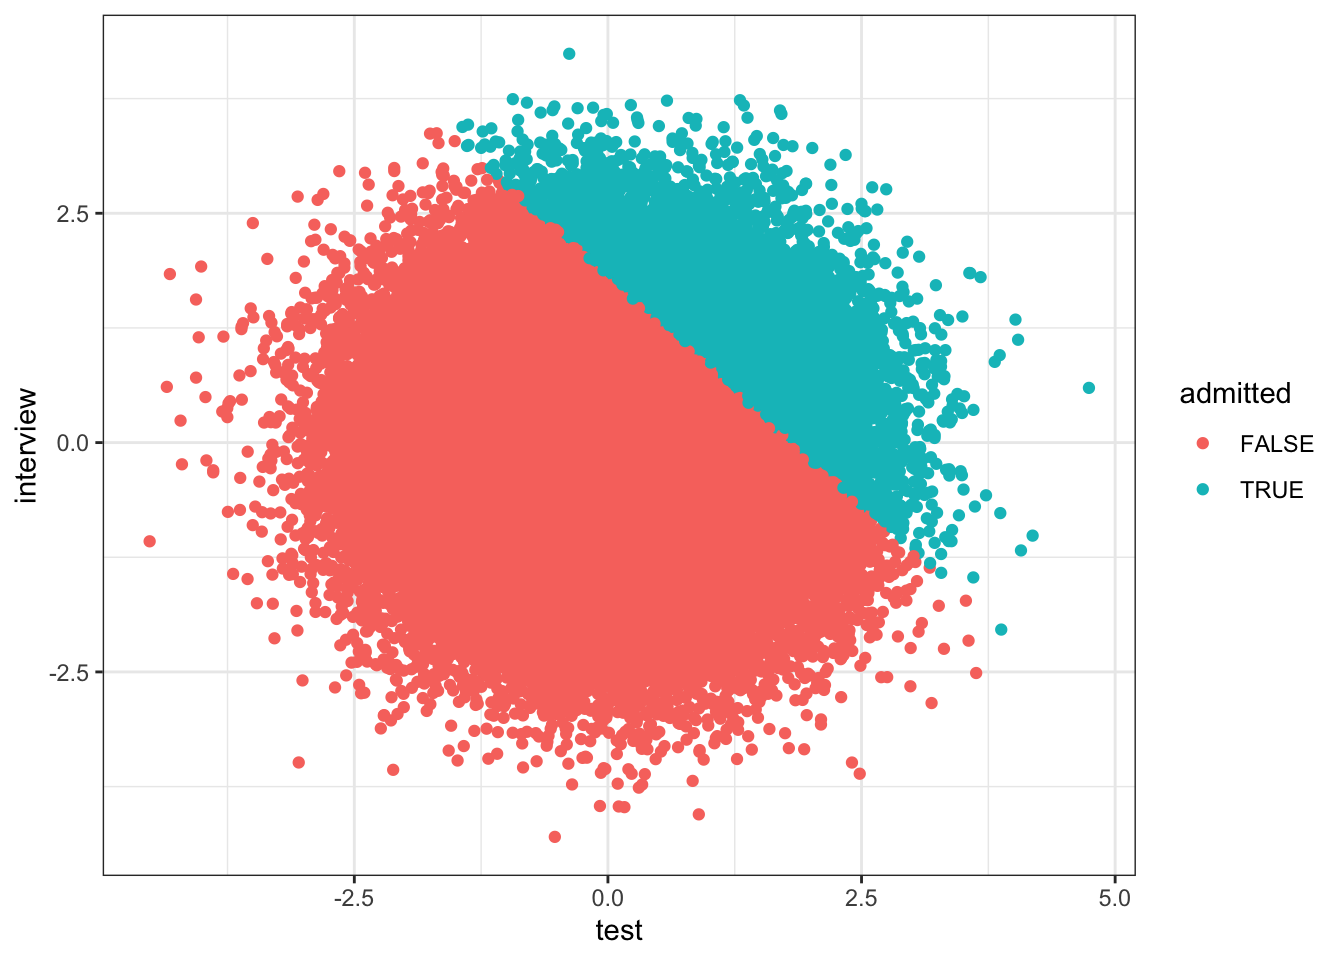 Scatter plot of interview scores against test scores with admission status indicated by colour. While there is no relation between interview scores and test scores, conditioning on admission status leads to a negative correlation between test scores and interview scores for both admitted students and non-admitted students.